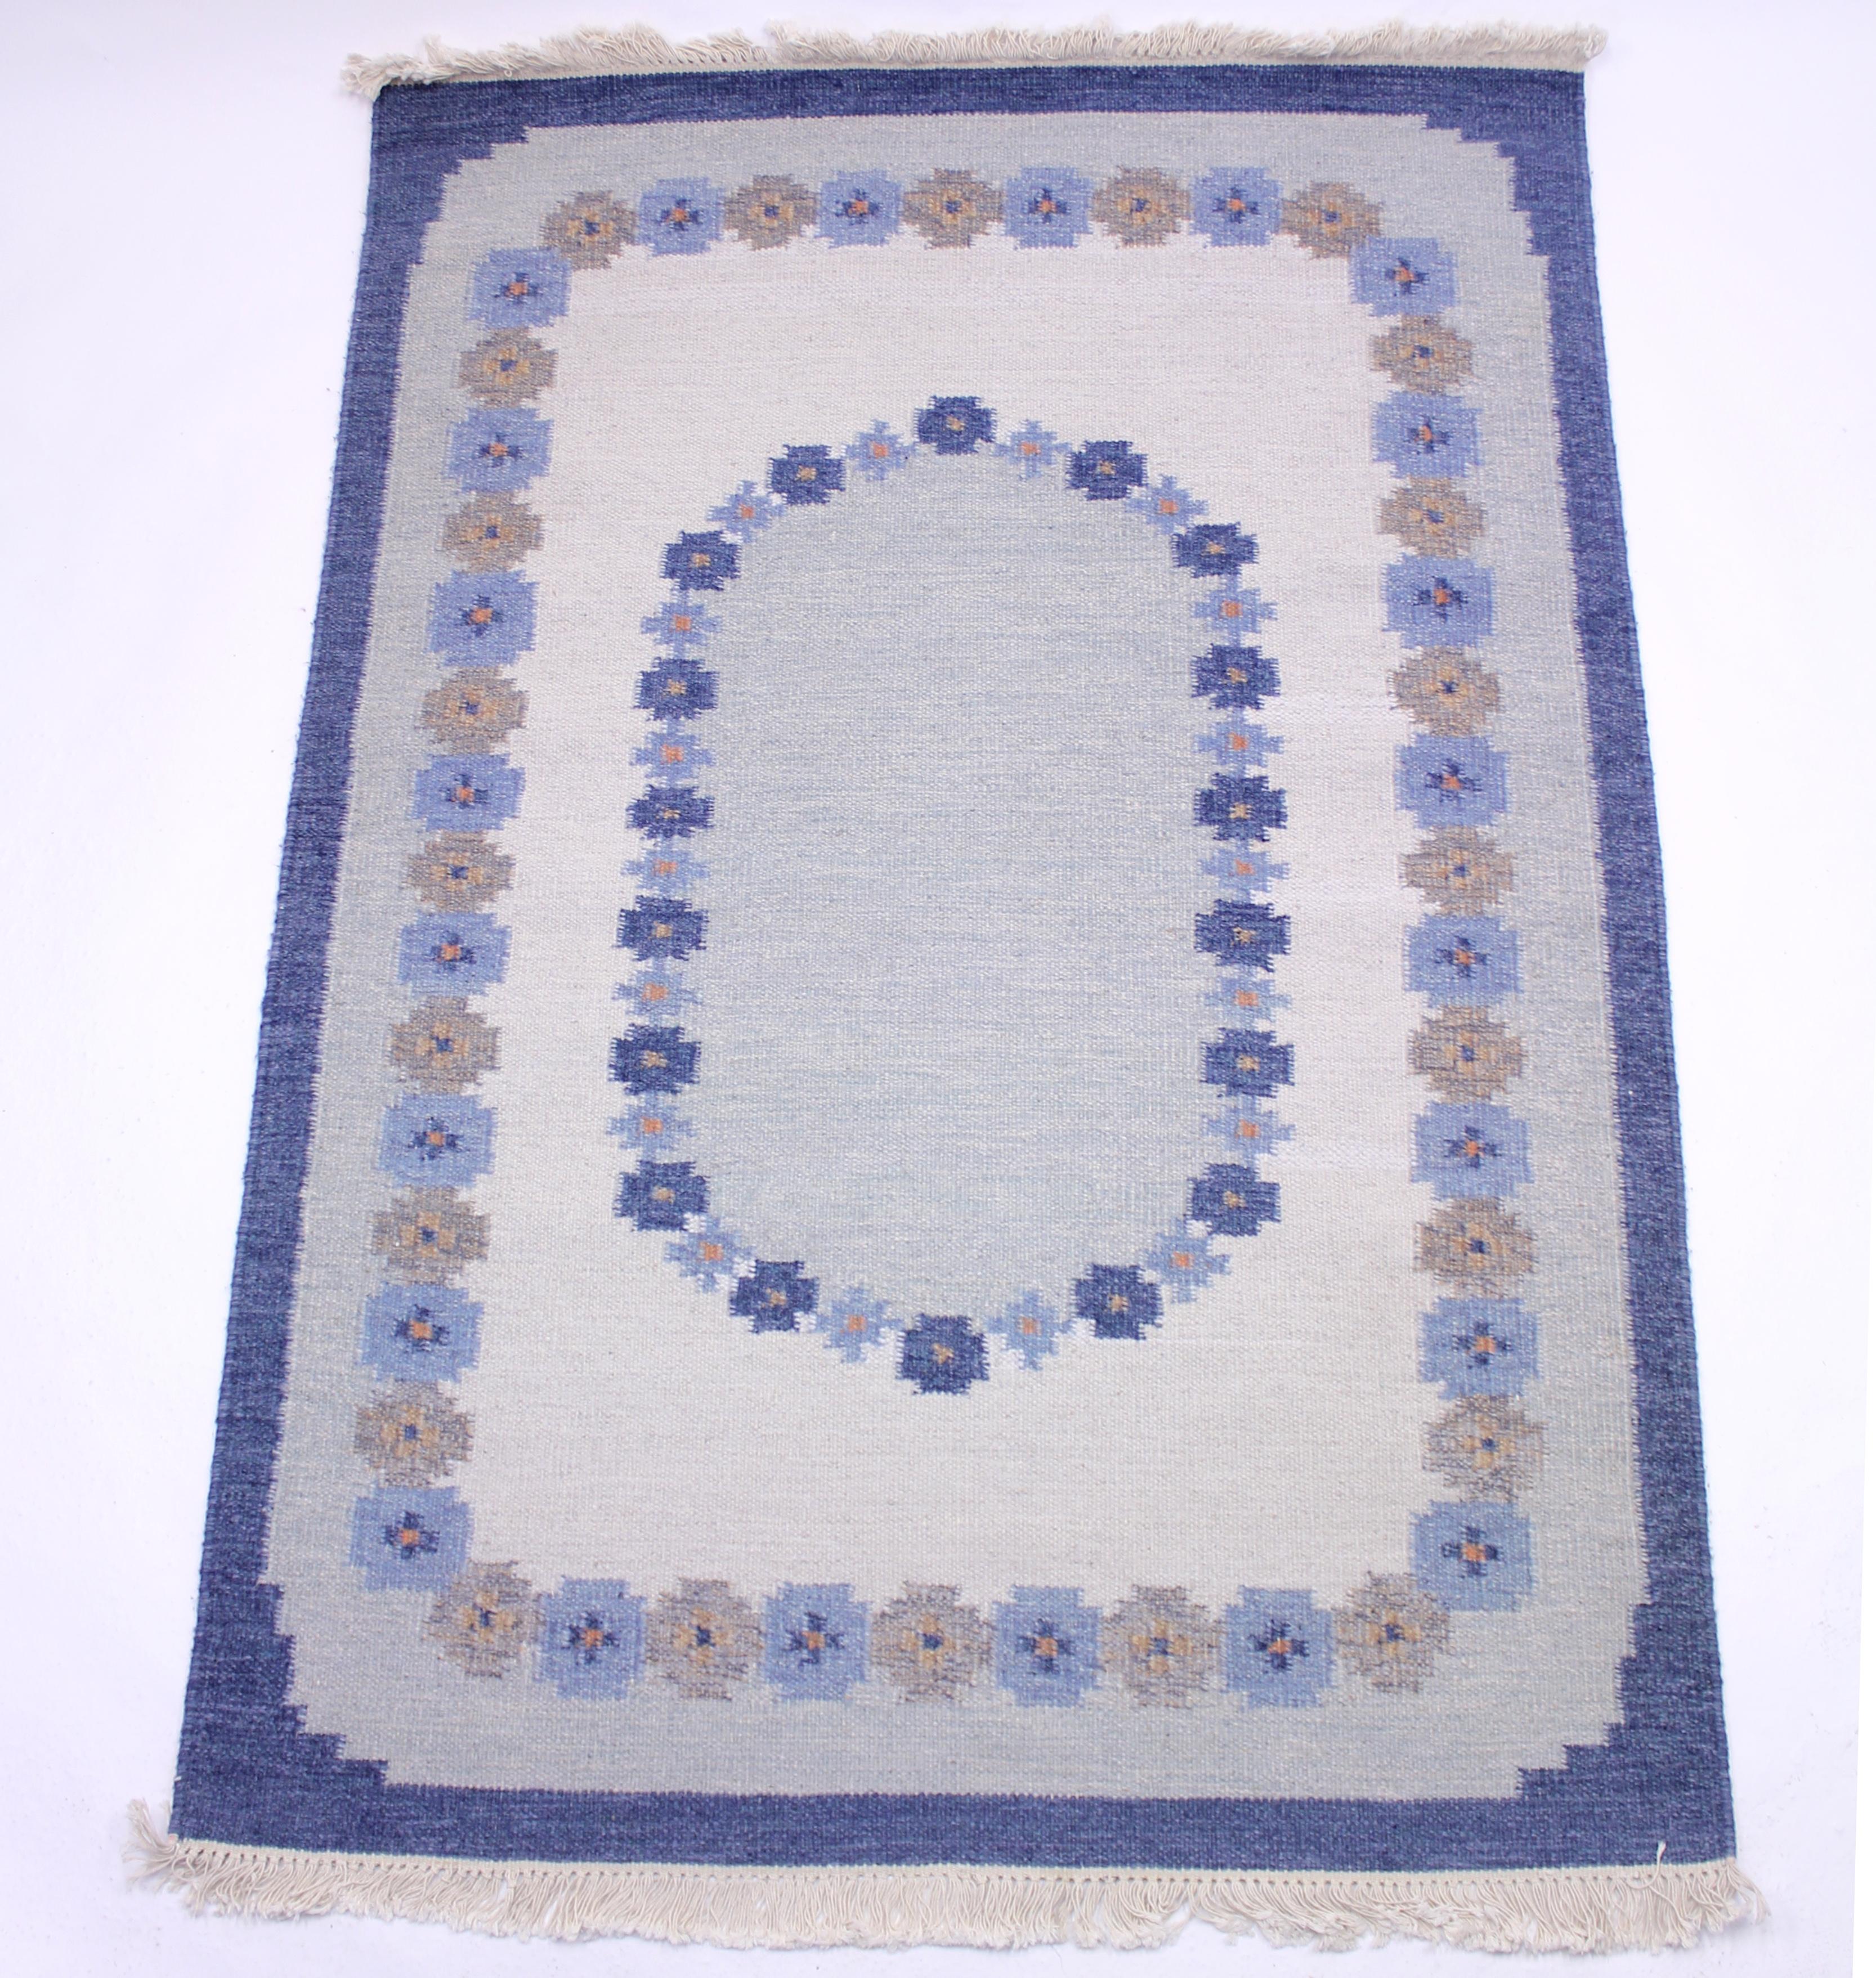 Swedish flat weave Röllakan carpet from the 1950s by unknown designer. Main colours are blue and white with a dose of brown. Newly cleaned by a professional carpet cleaning company. Very good vintage condition with minimal ware consistent with age